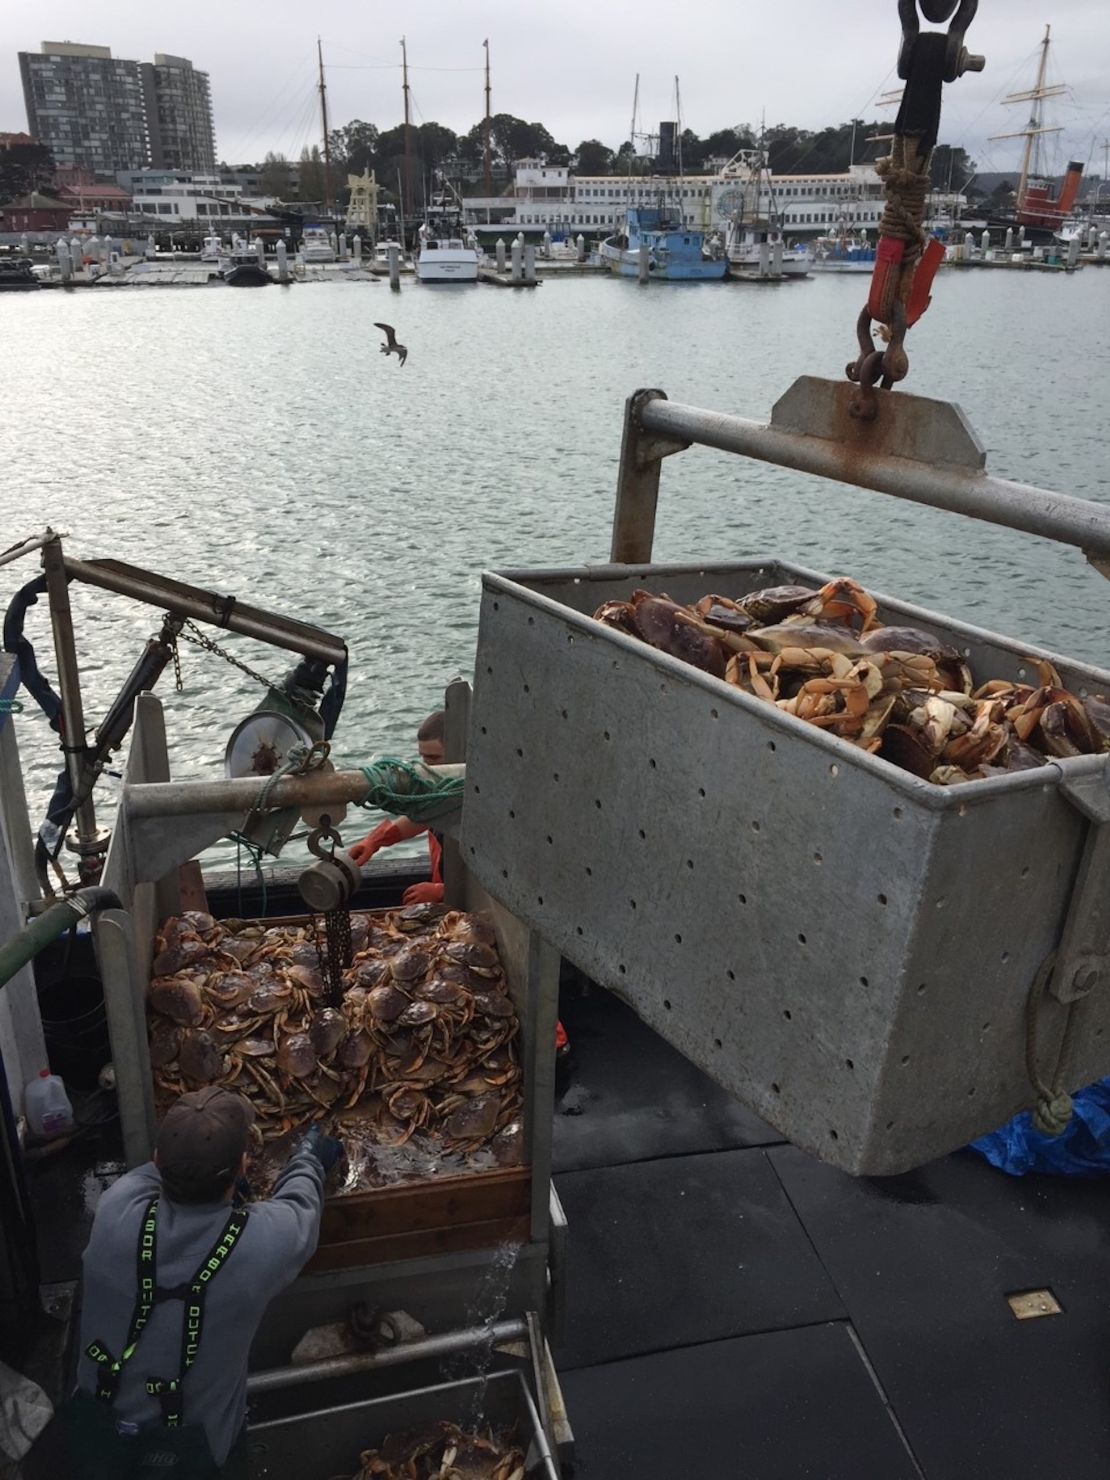 Another main fishery in California is the Dungeness crab. Here, men can be seen unloading the crabs from fishing boats for Water2Table, Joe Conte's fish distribution company.